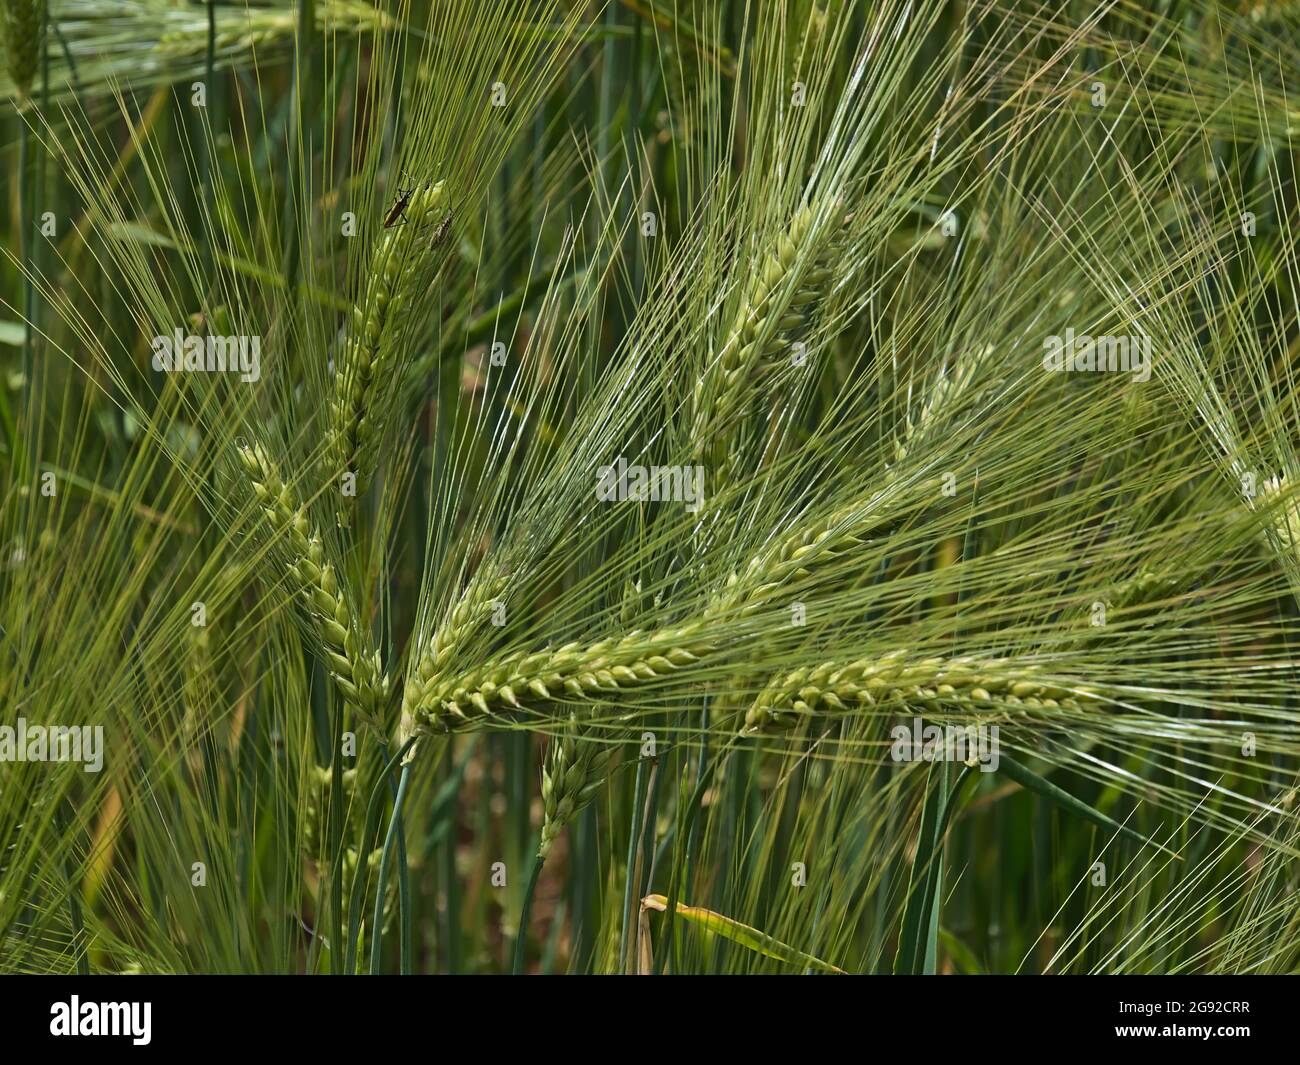 Close-up view of cereal grain field with green shimmering barley plants (hordeum vulgare) in summer time in Swabian Alb, Germany. Stock Photo